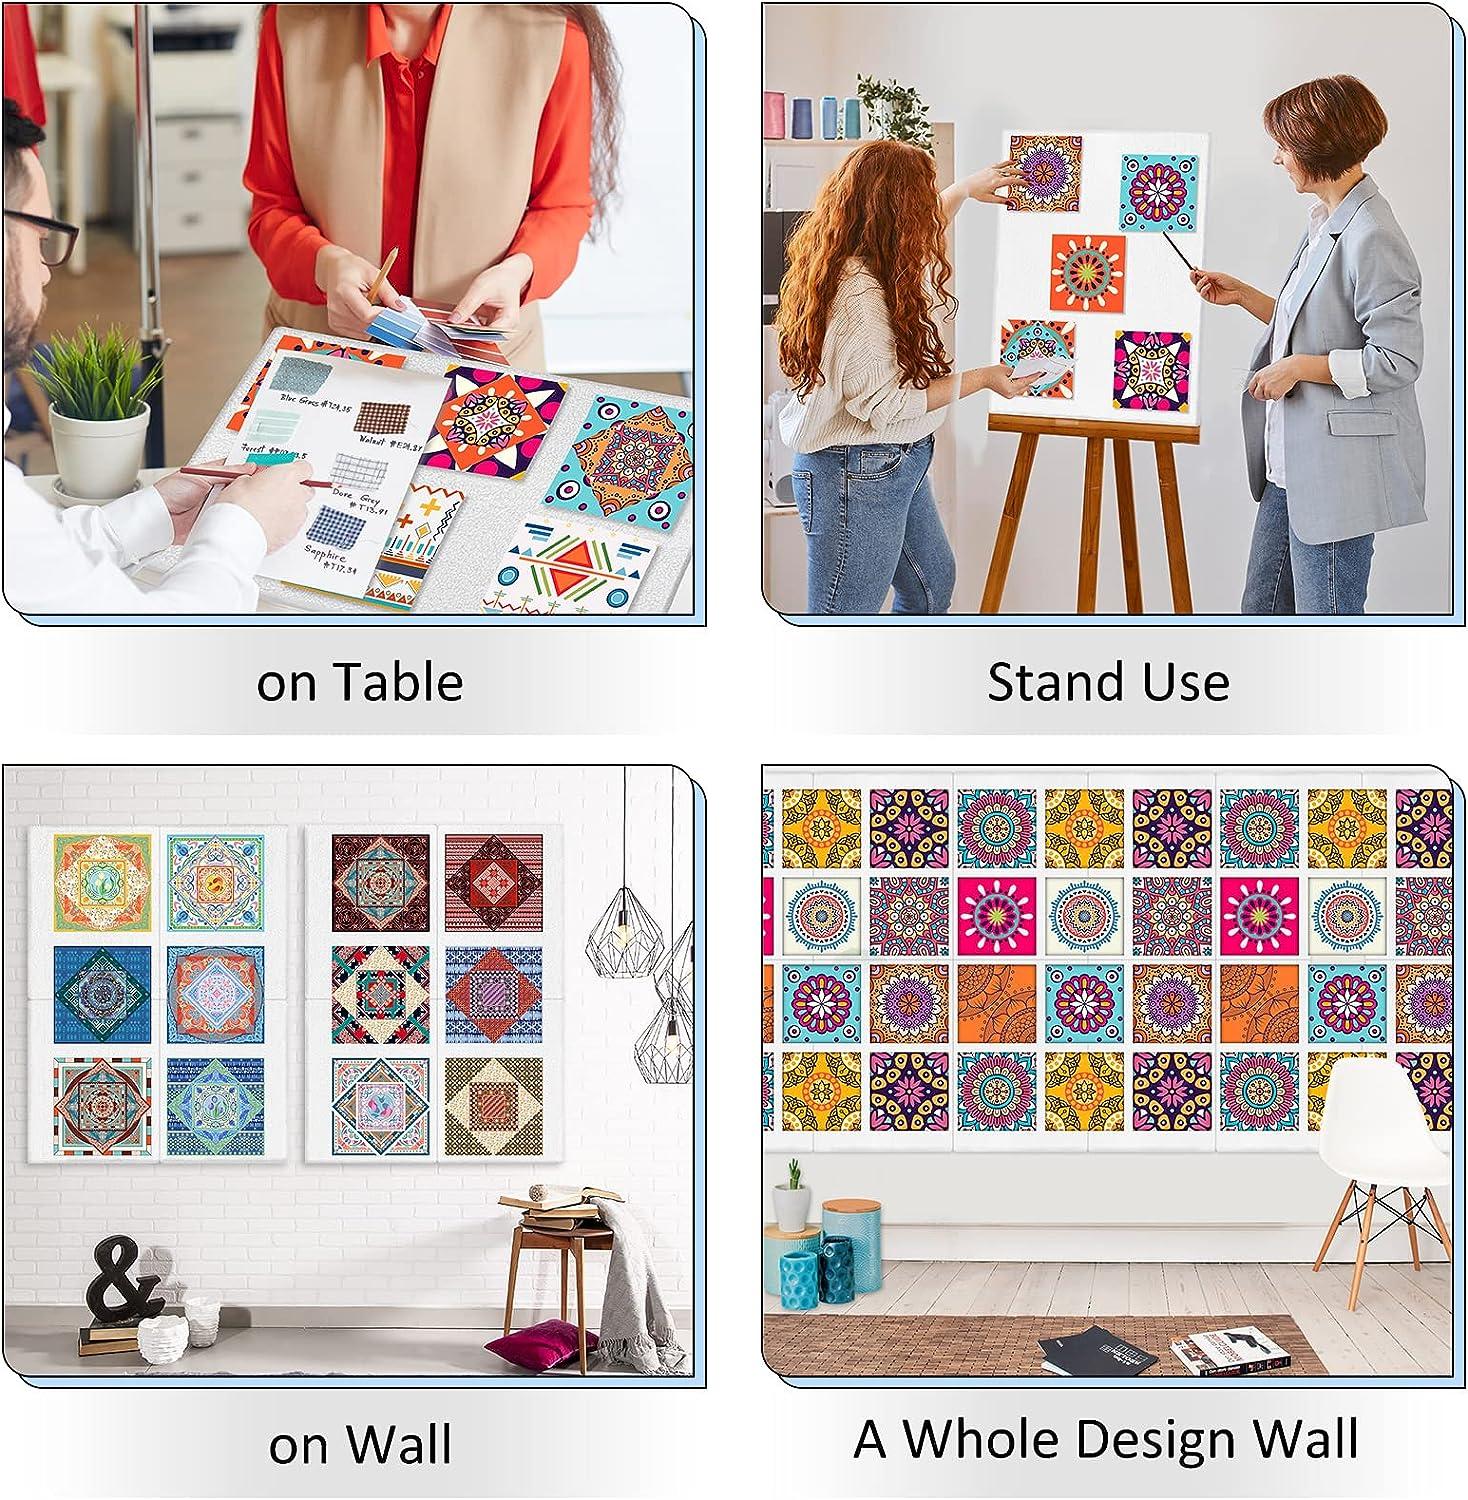 91 Quilting room: Design Wall ideas  quilting room, sewing rooms, quilt  design wall